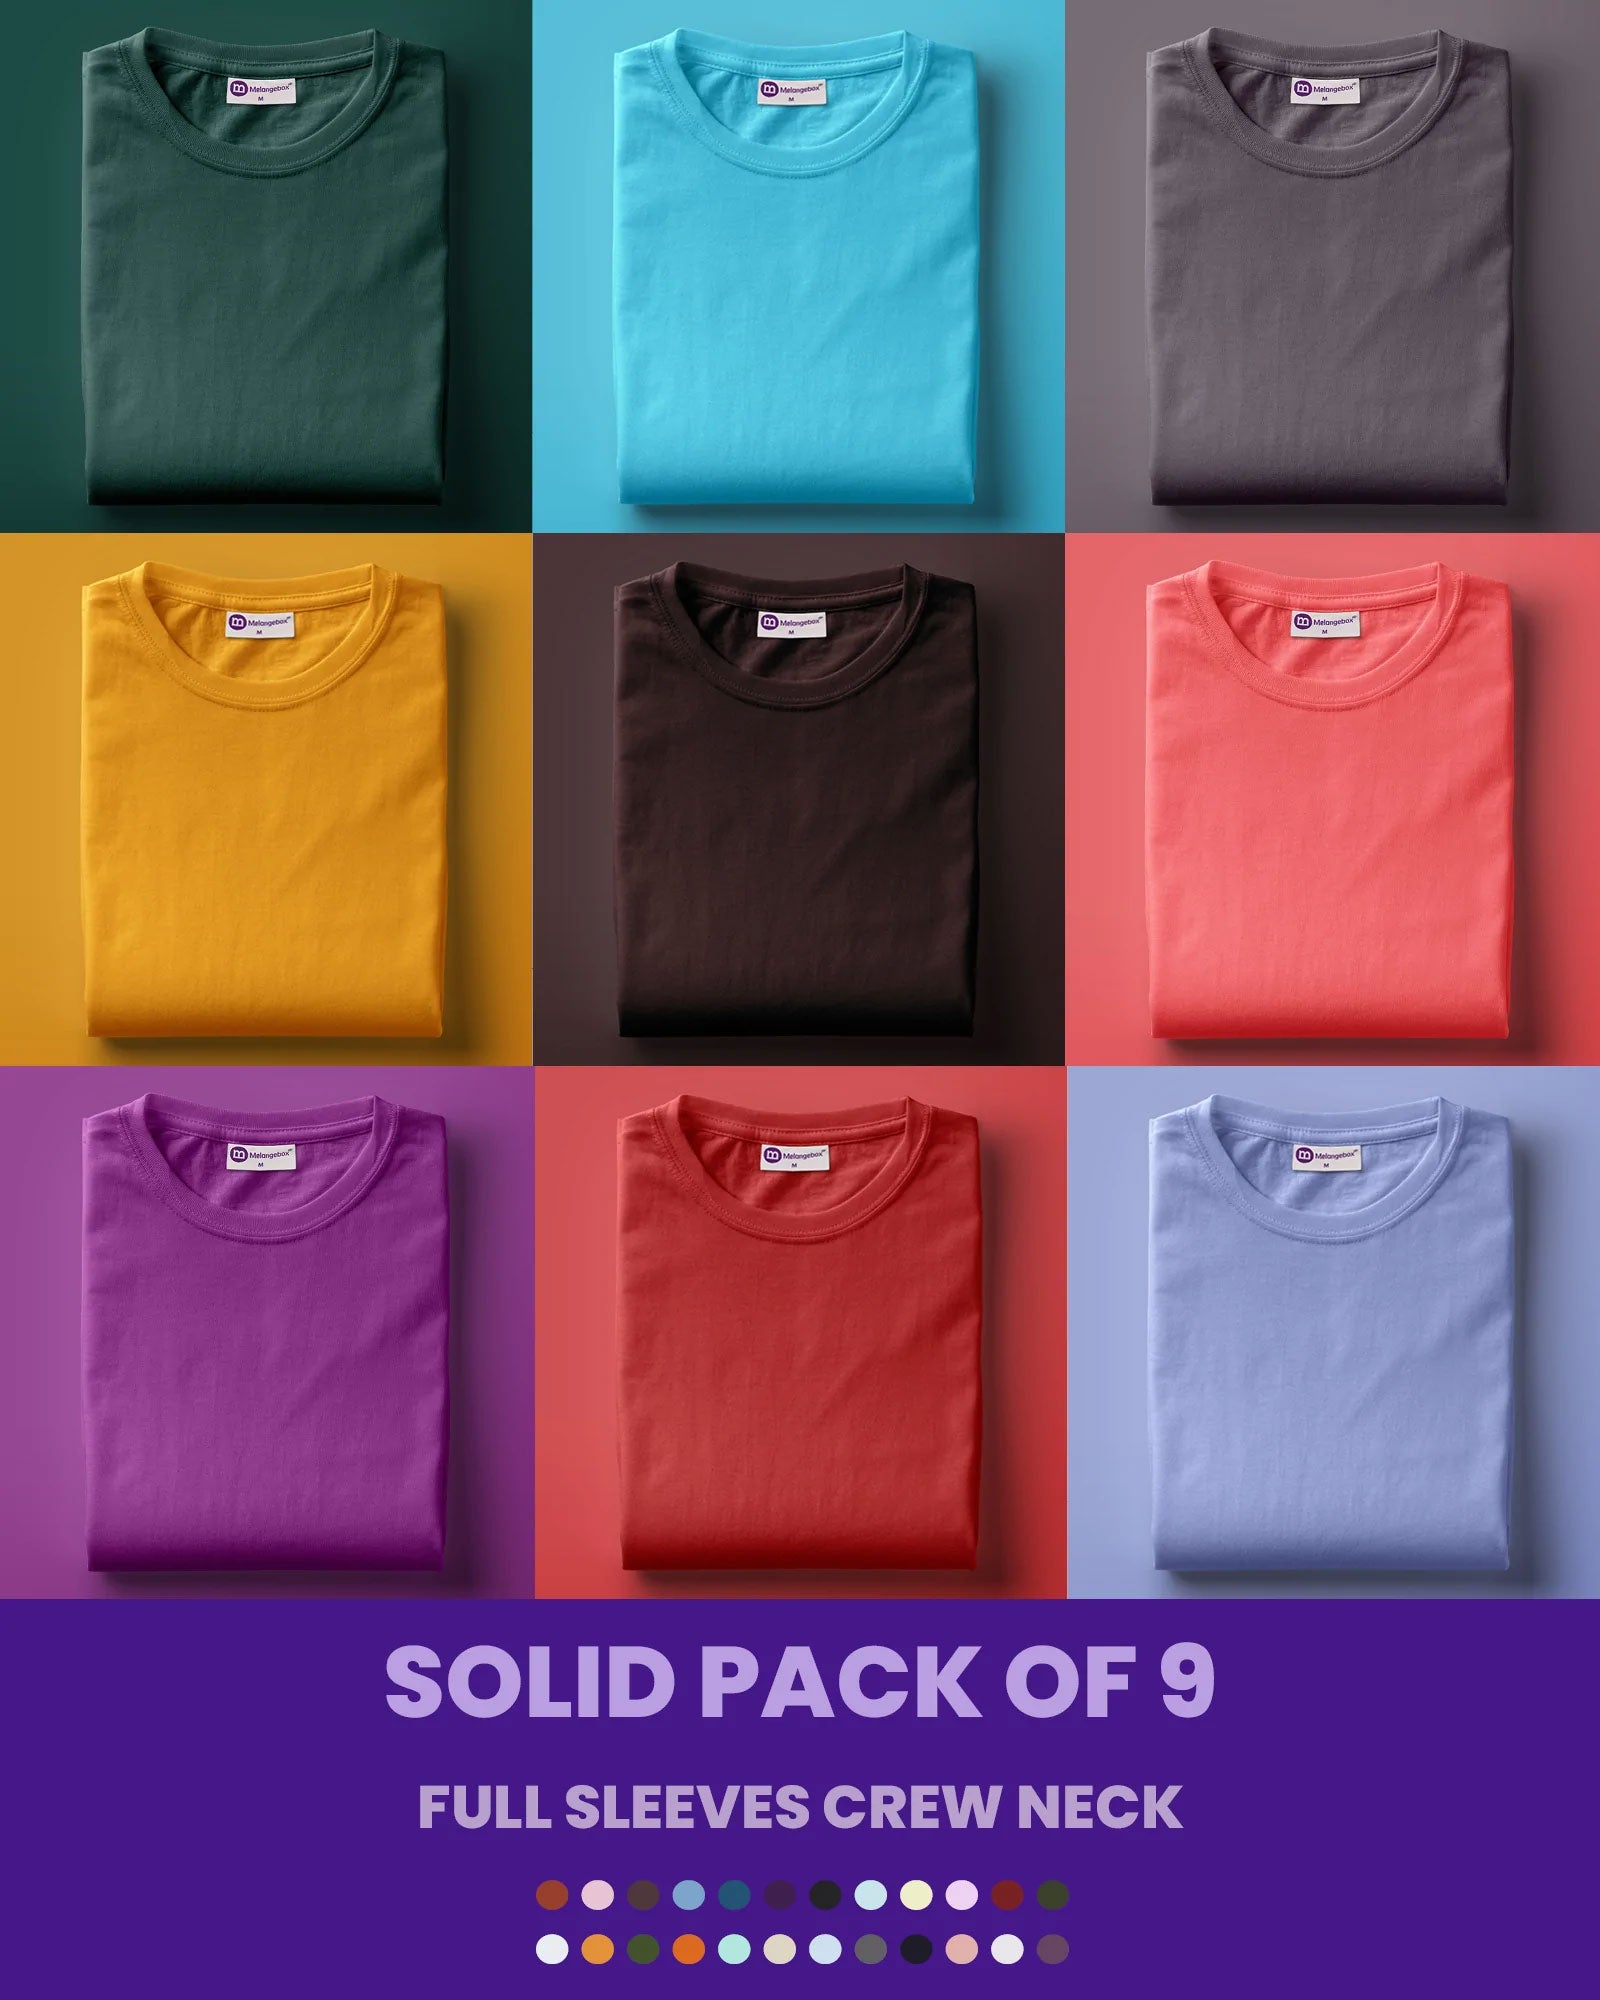 Solid Pack of 9: Full Sleeves Crew Neck